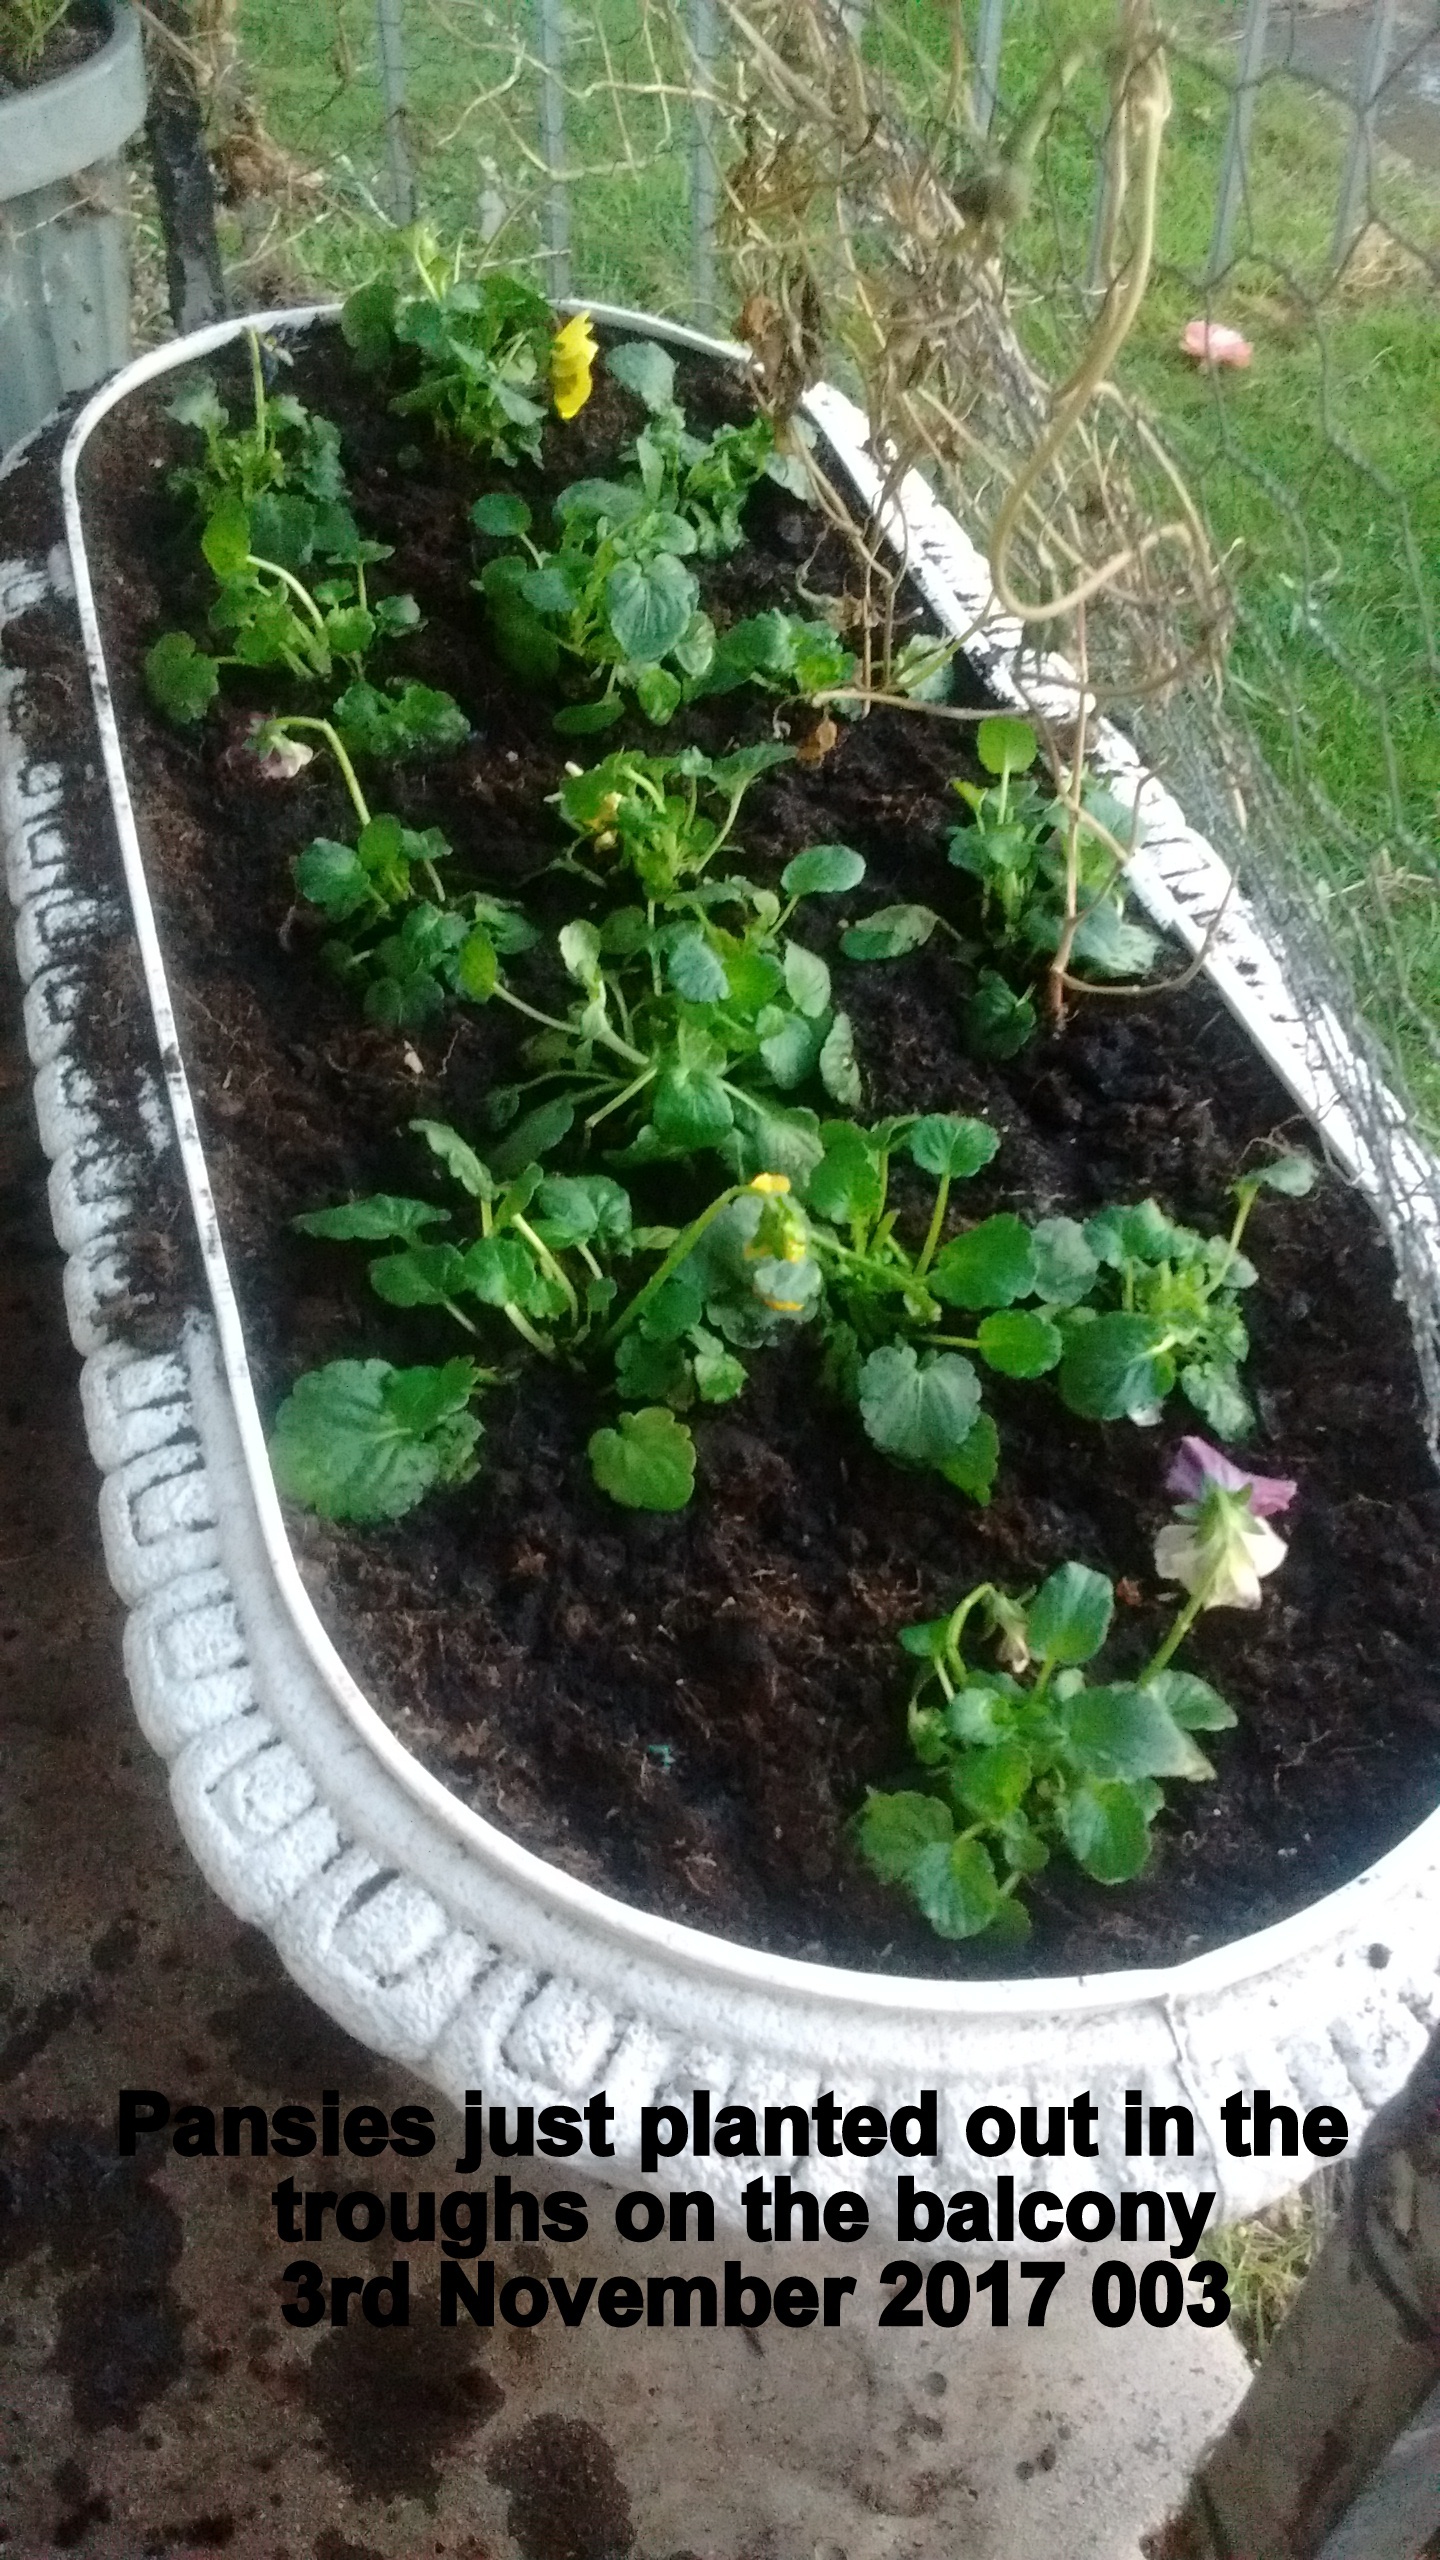 Pansies just planted out in the troughs on the balcony 3rd November 2017 003